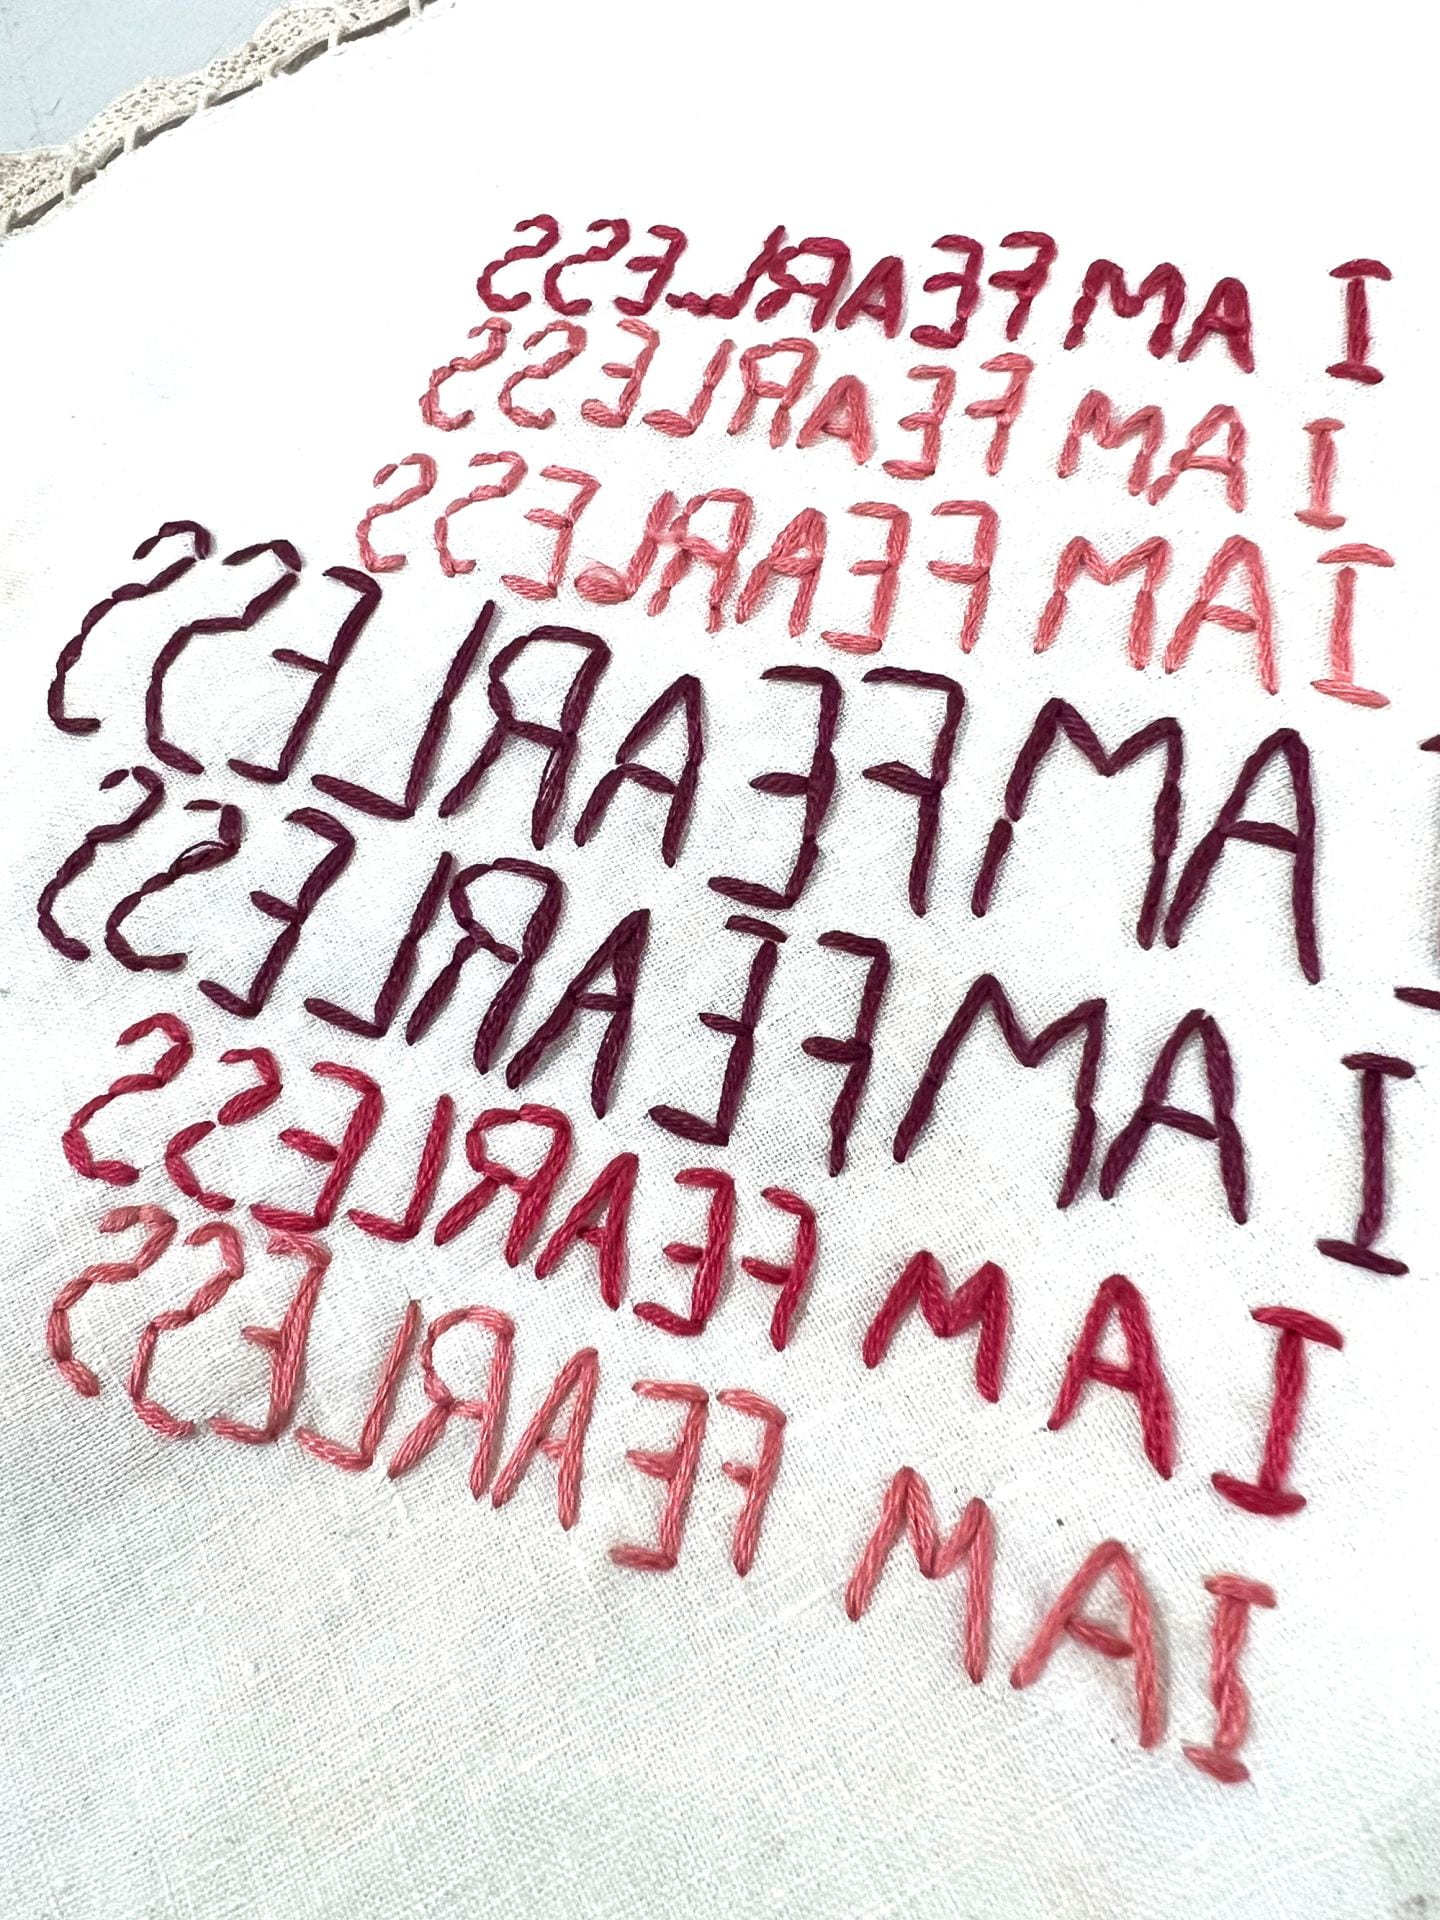 embroidered text on cotton handkerchief